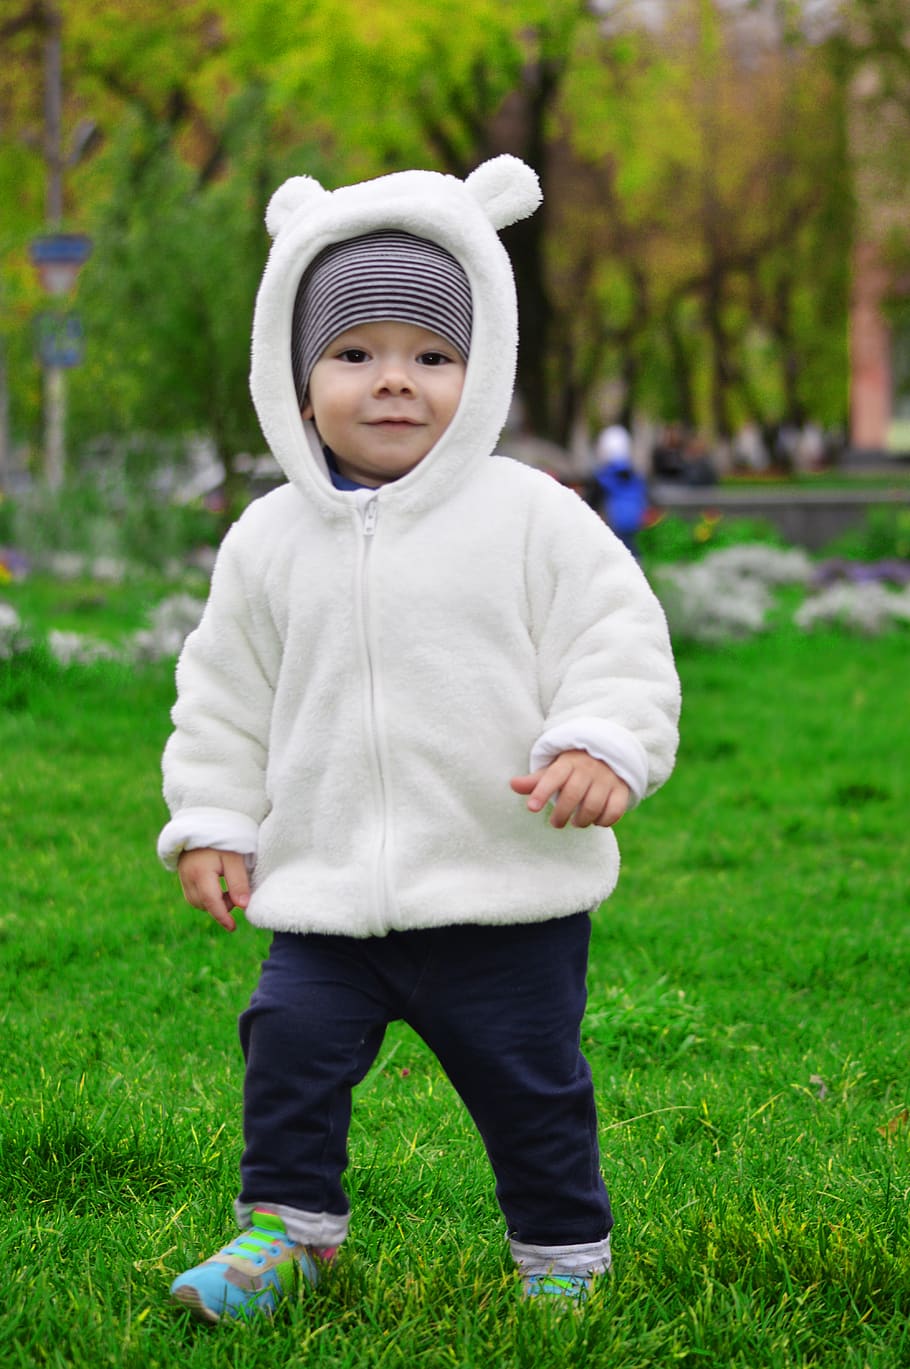 funny kid, child plays, happy child, a happy childhood, great costume, bear jacket with ears, little boy running on the grass, boy, young, kids